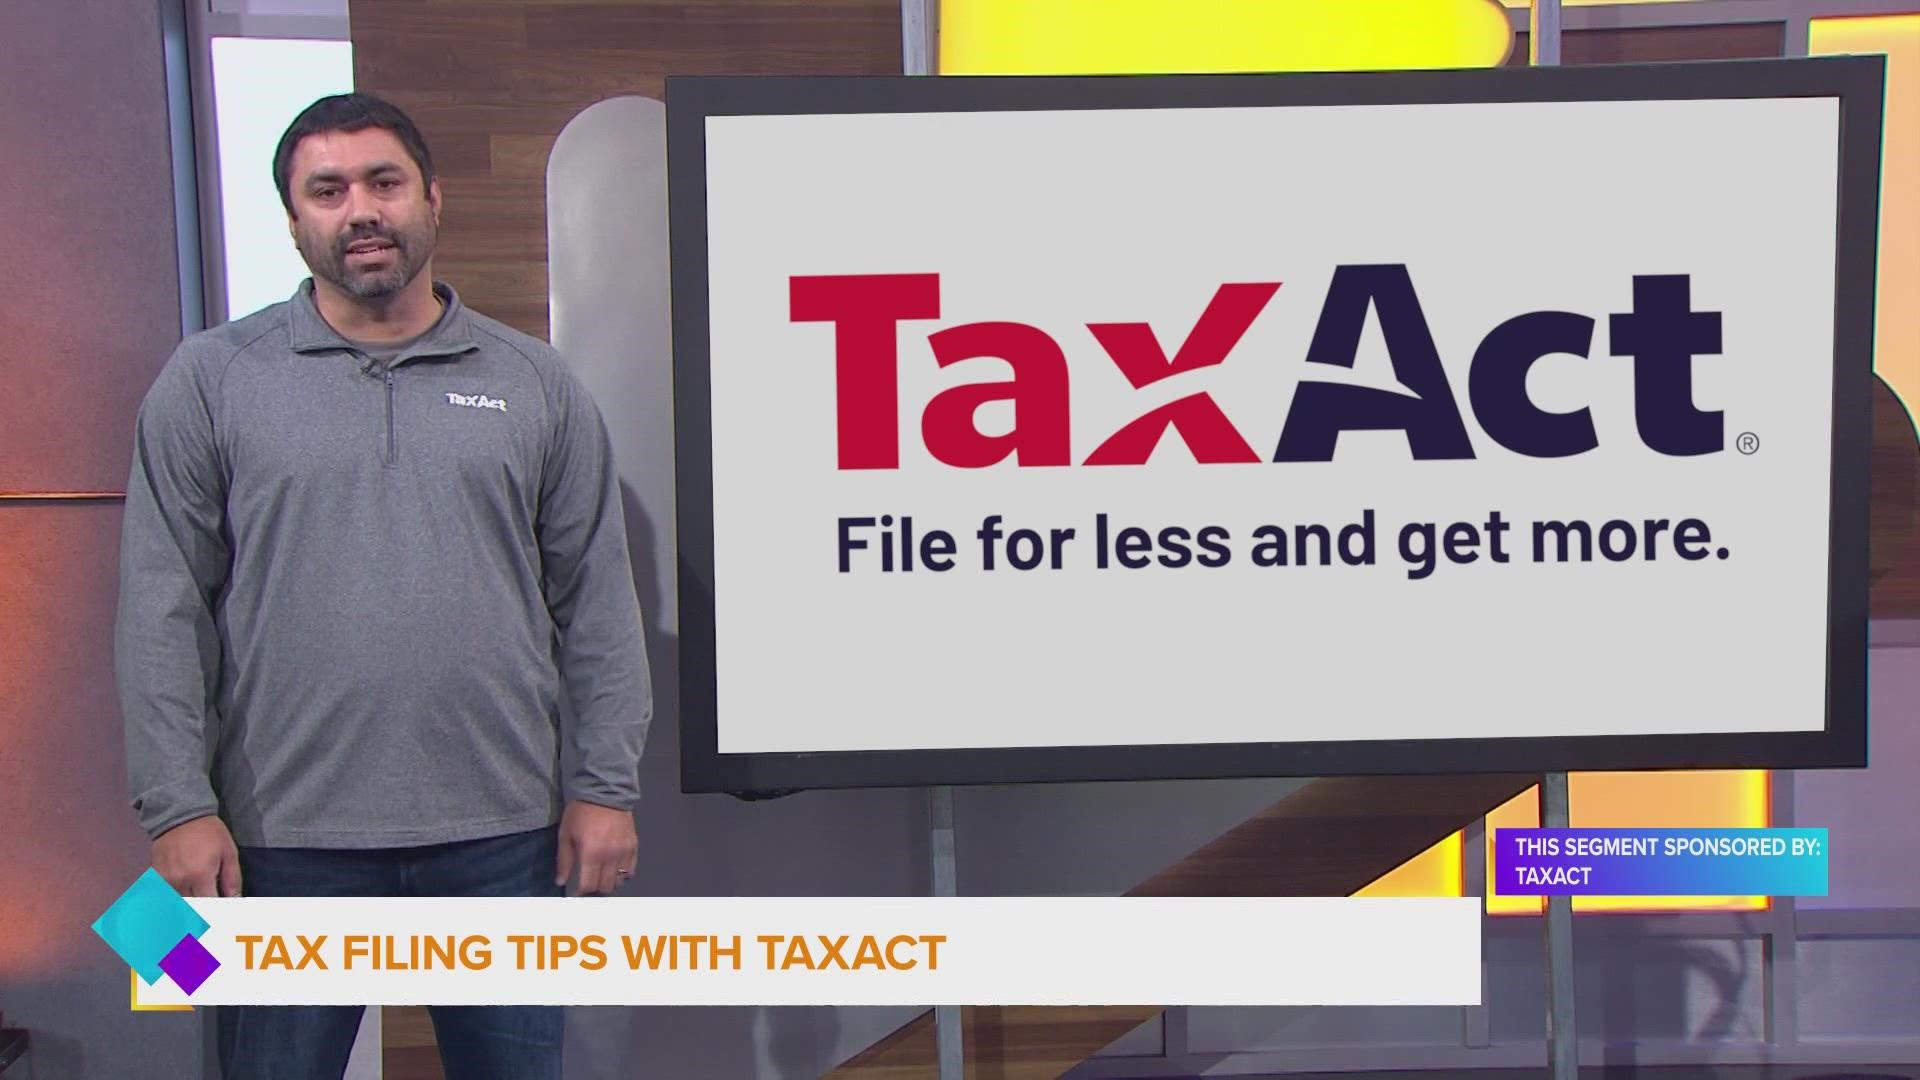 TAXACT is here to help make filing taxes easier | Paid Content